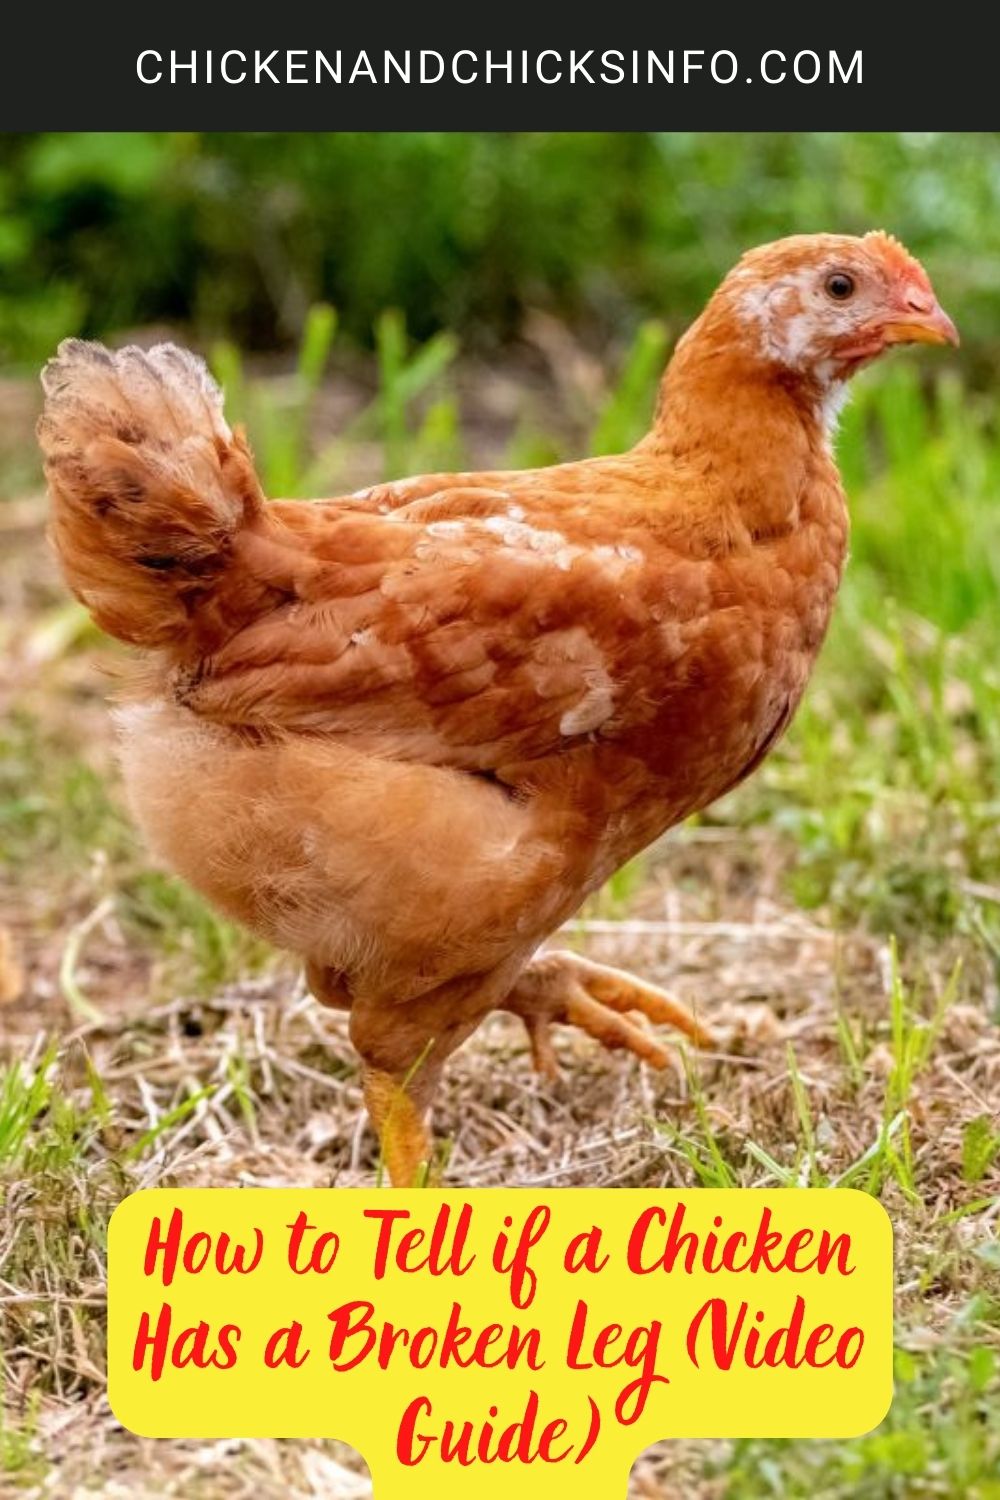 How to Tell if a Chicken Has a Broken Leg (Video Guide) poster.
